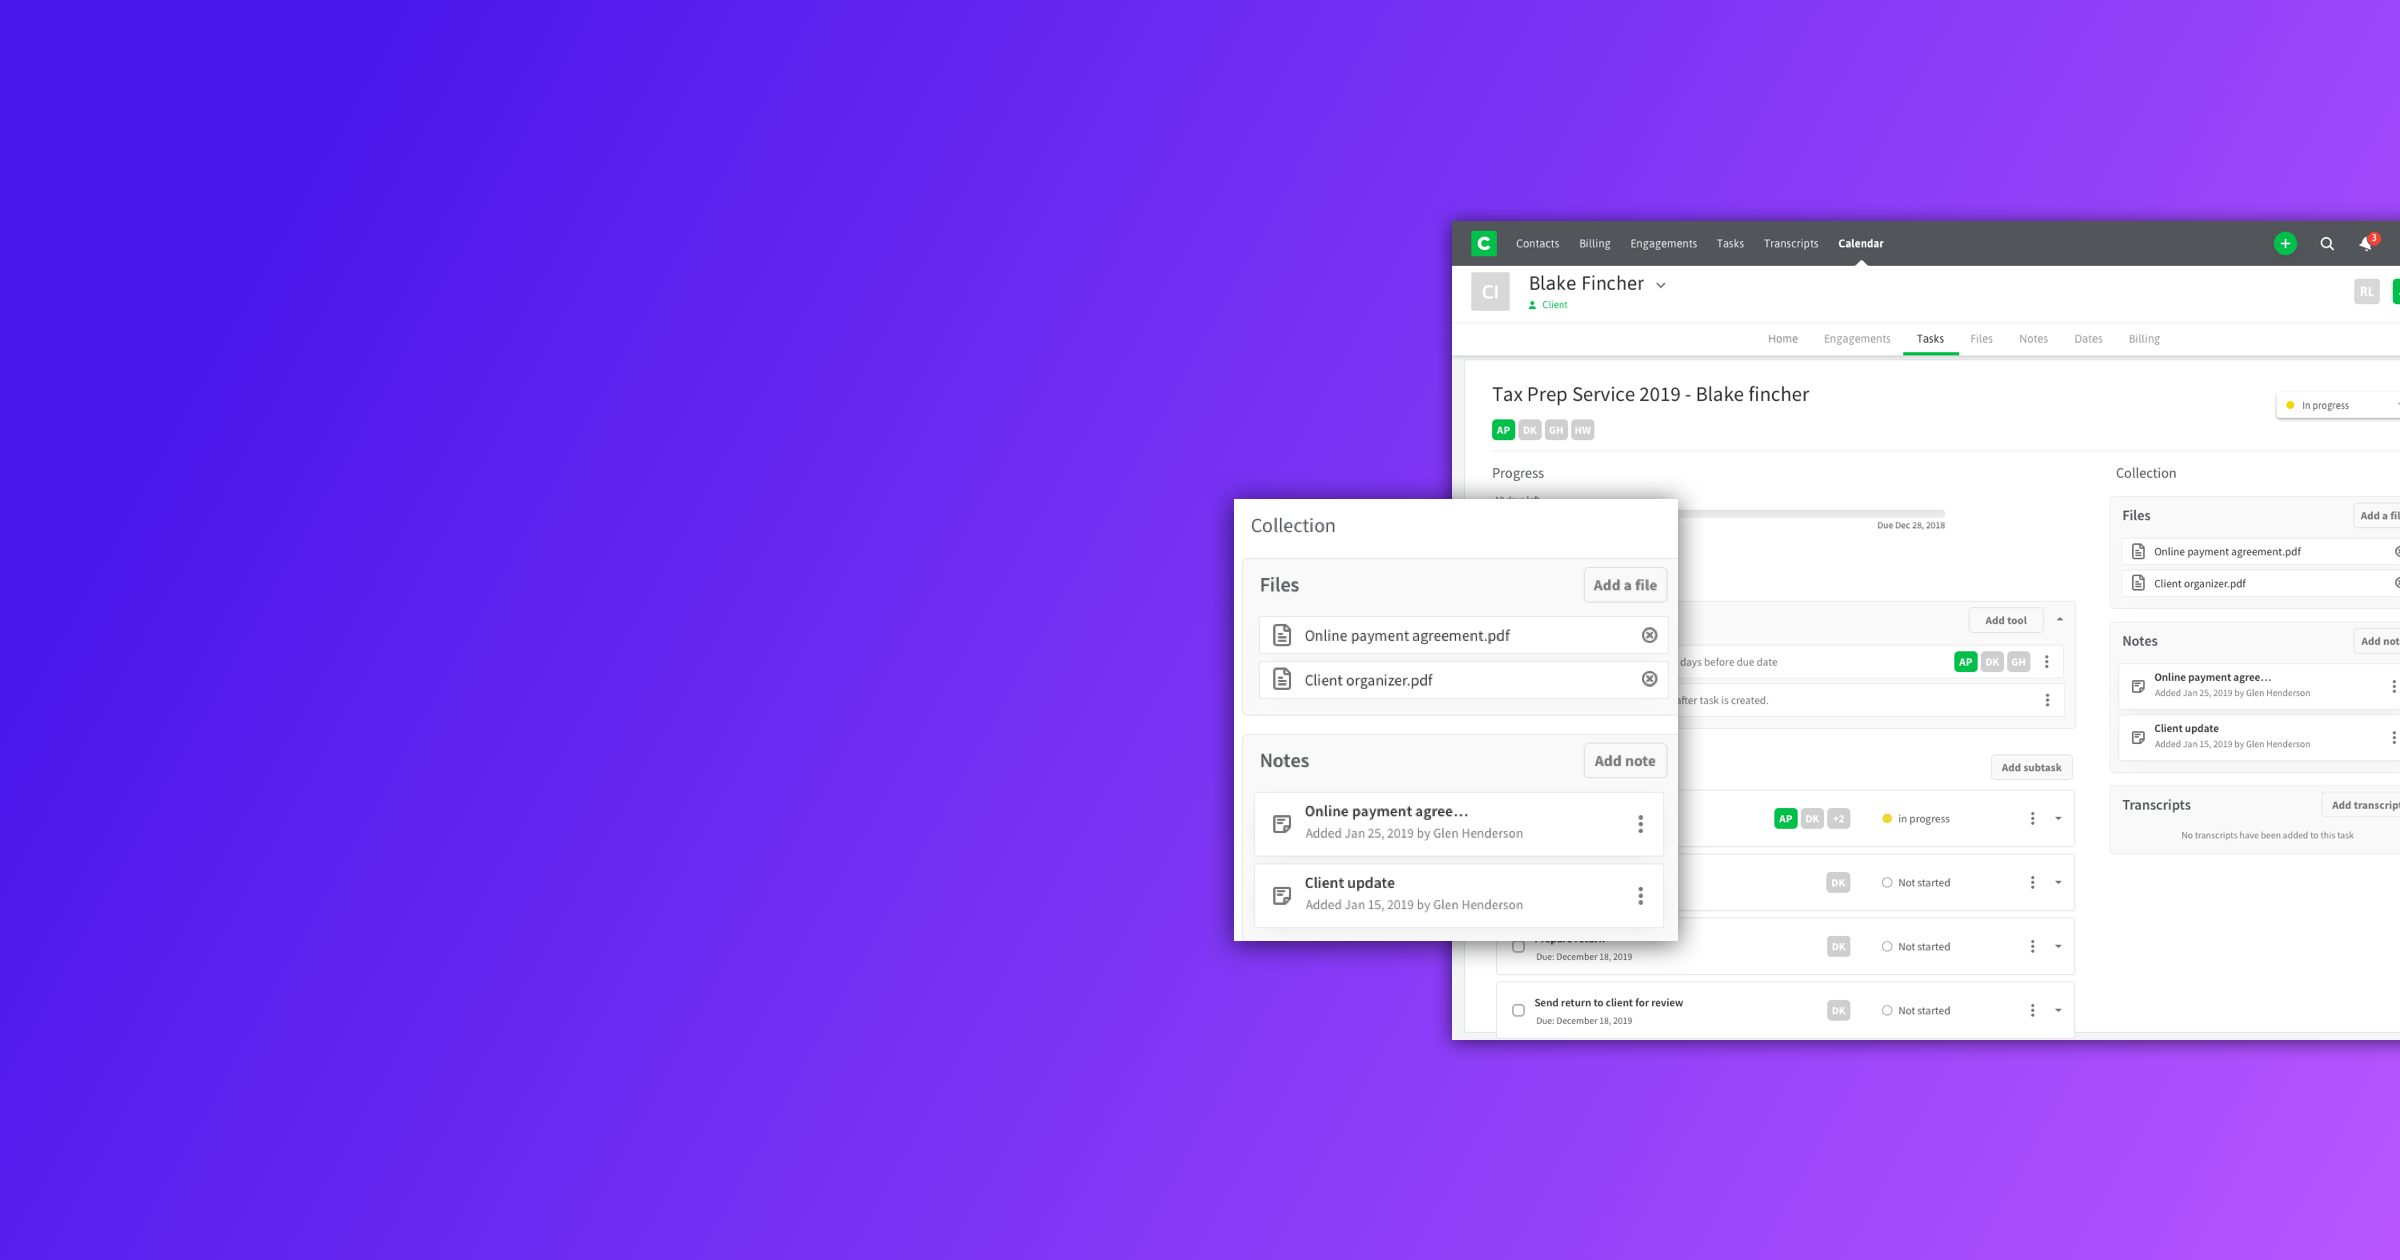 Feature Update: Workflow Focused on Collaboration